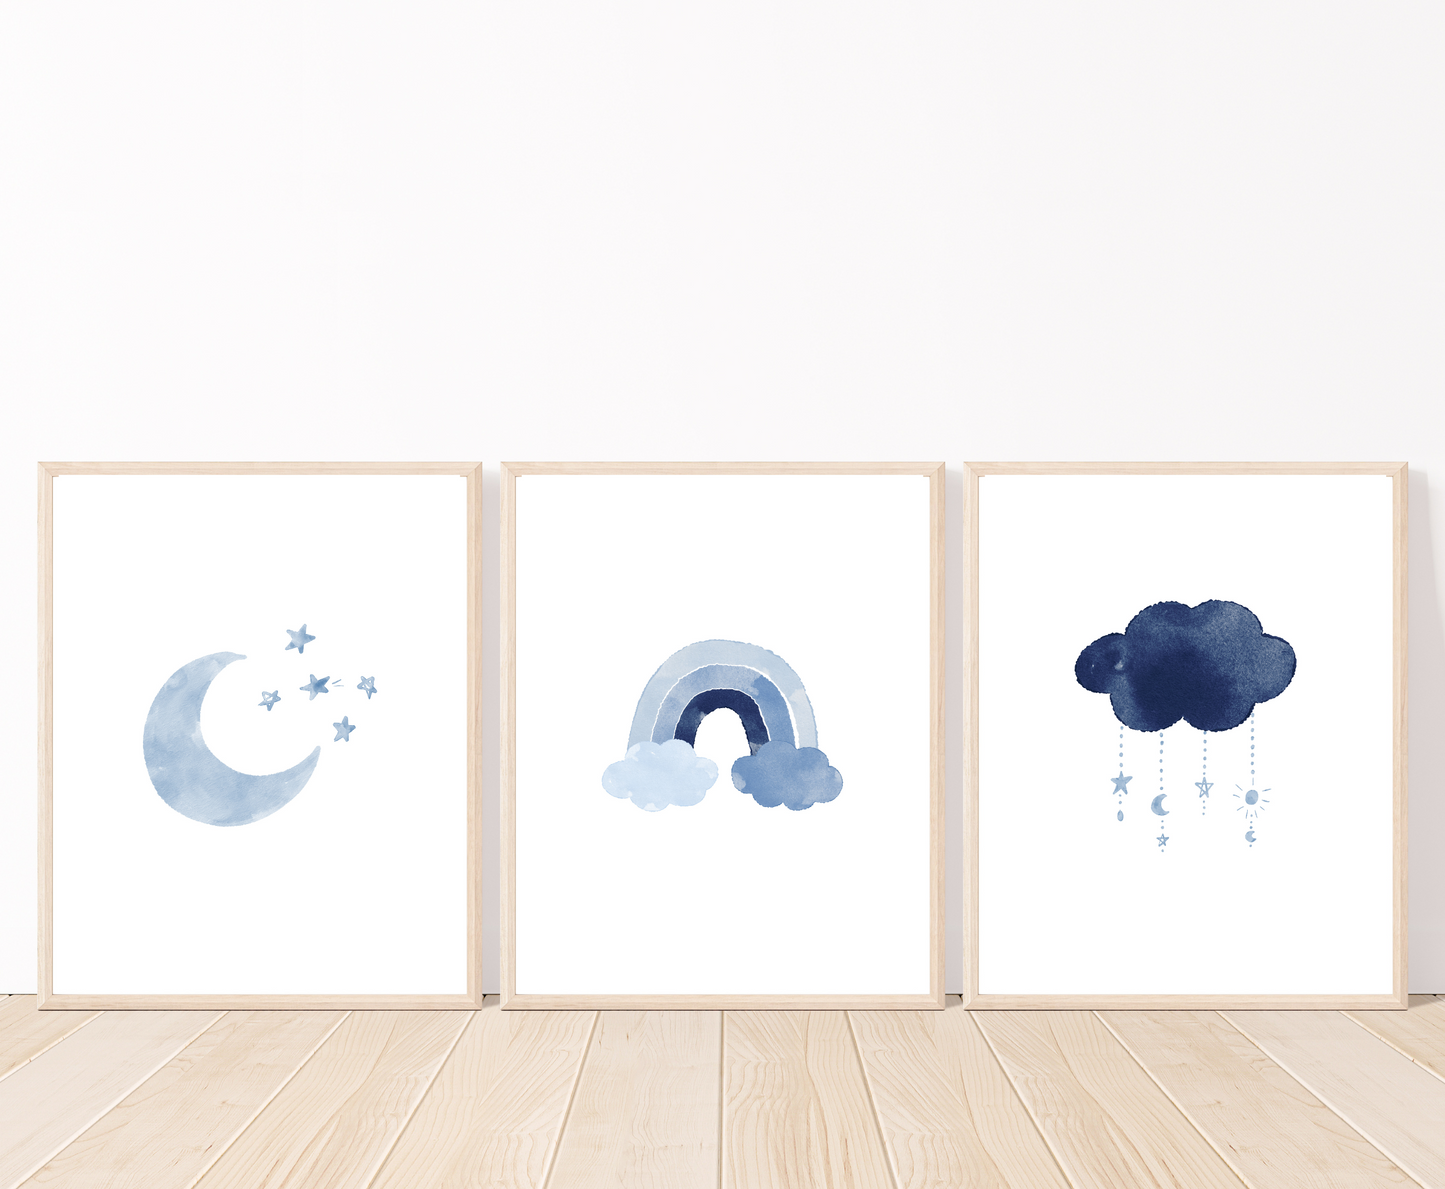 Three frames showing blue graphics that are placed on a white wall and parquet flooring. The first one shows a blue crescent moon with tiny blue stars right beside it. The second one shows a rainbow in different shades of blue. The third frame shows a dark blue cloud with tiny blue crescent moons and stars dangling from it.